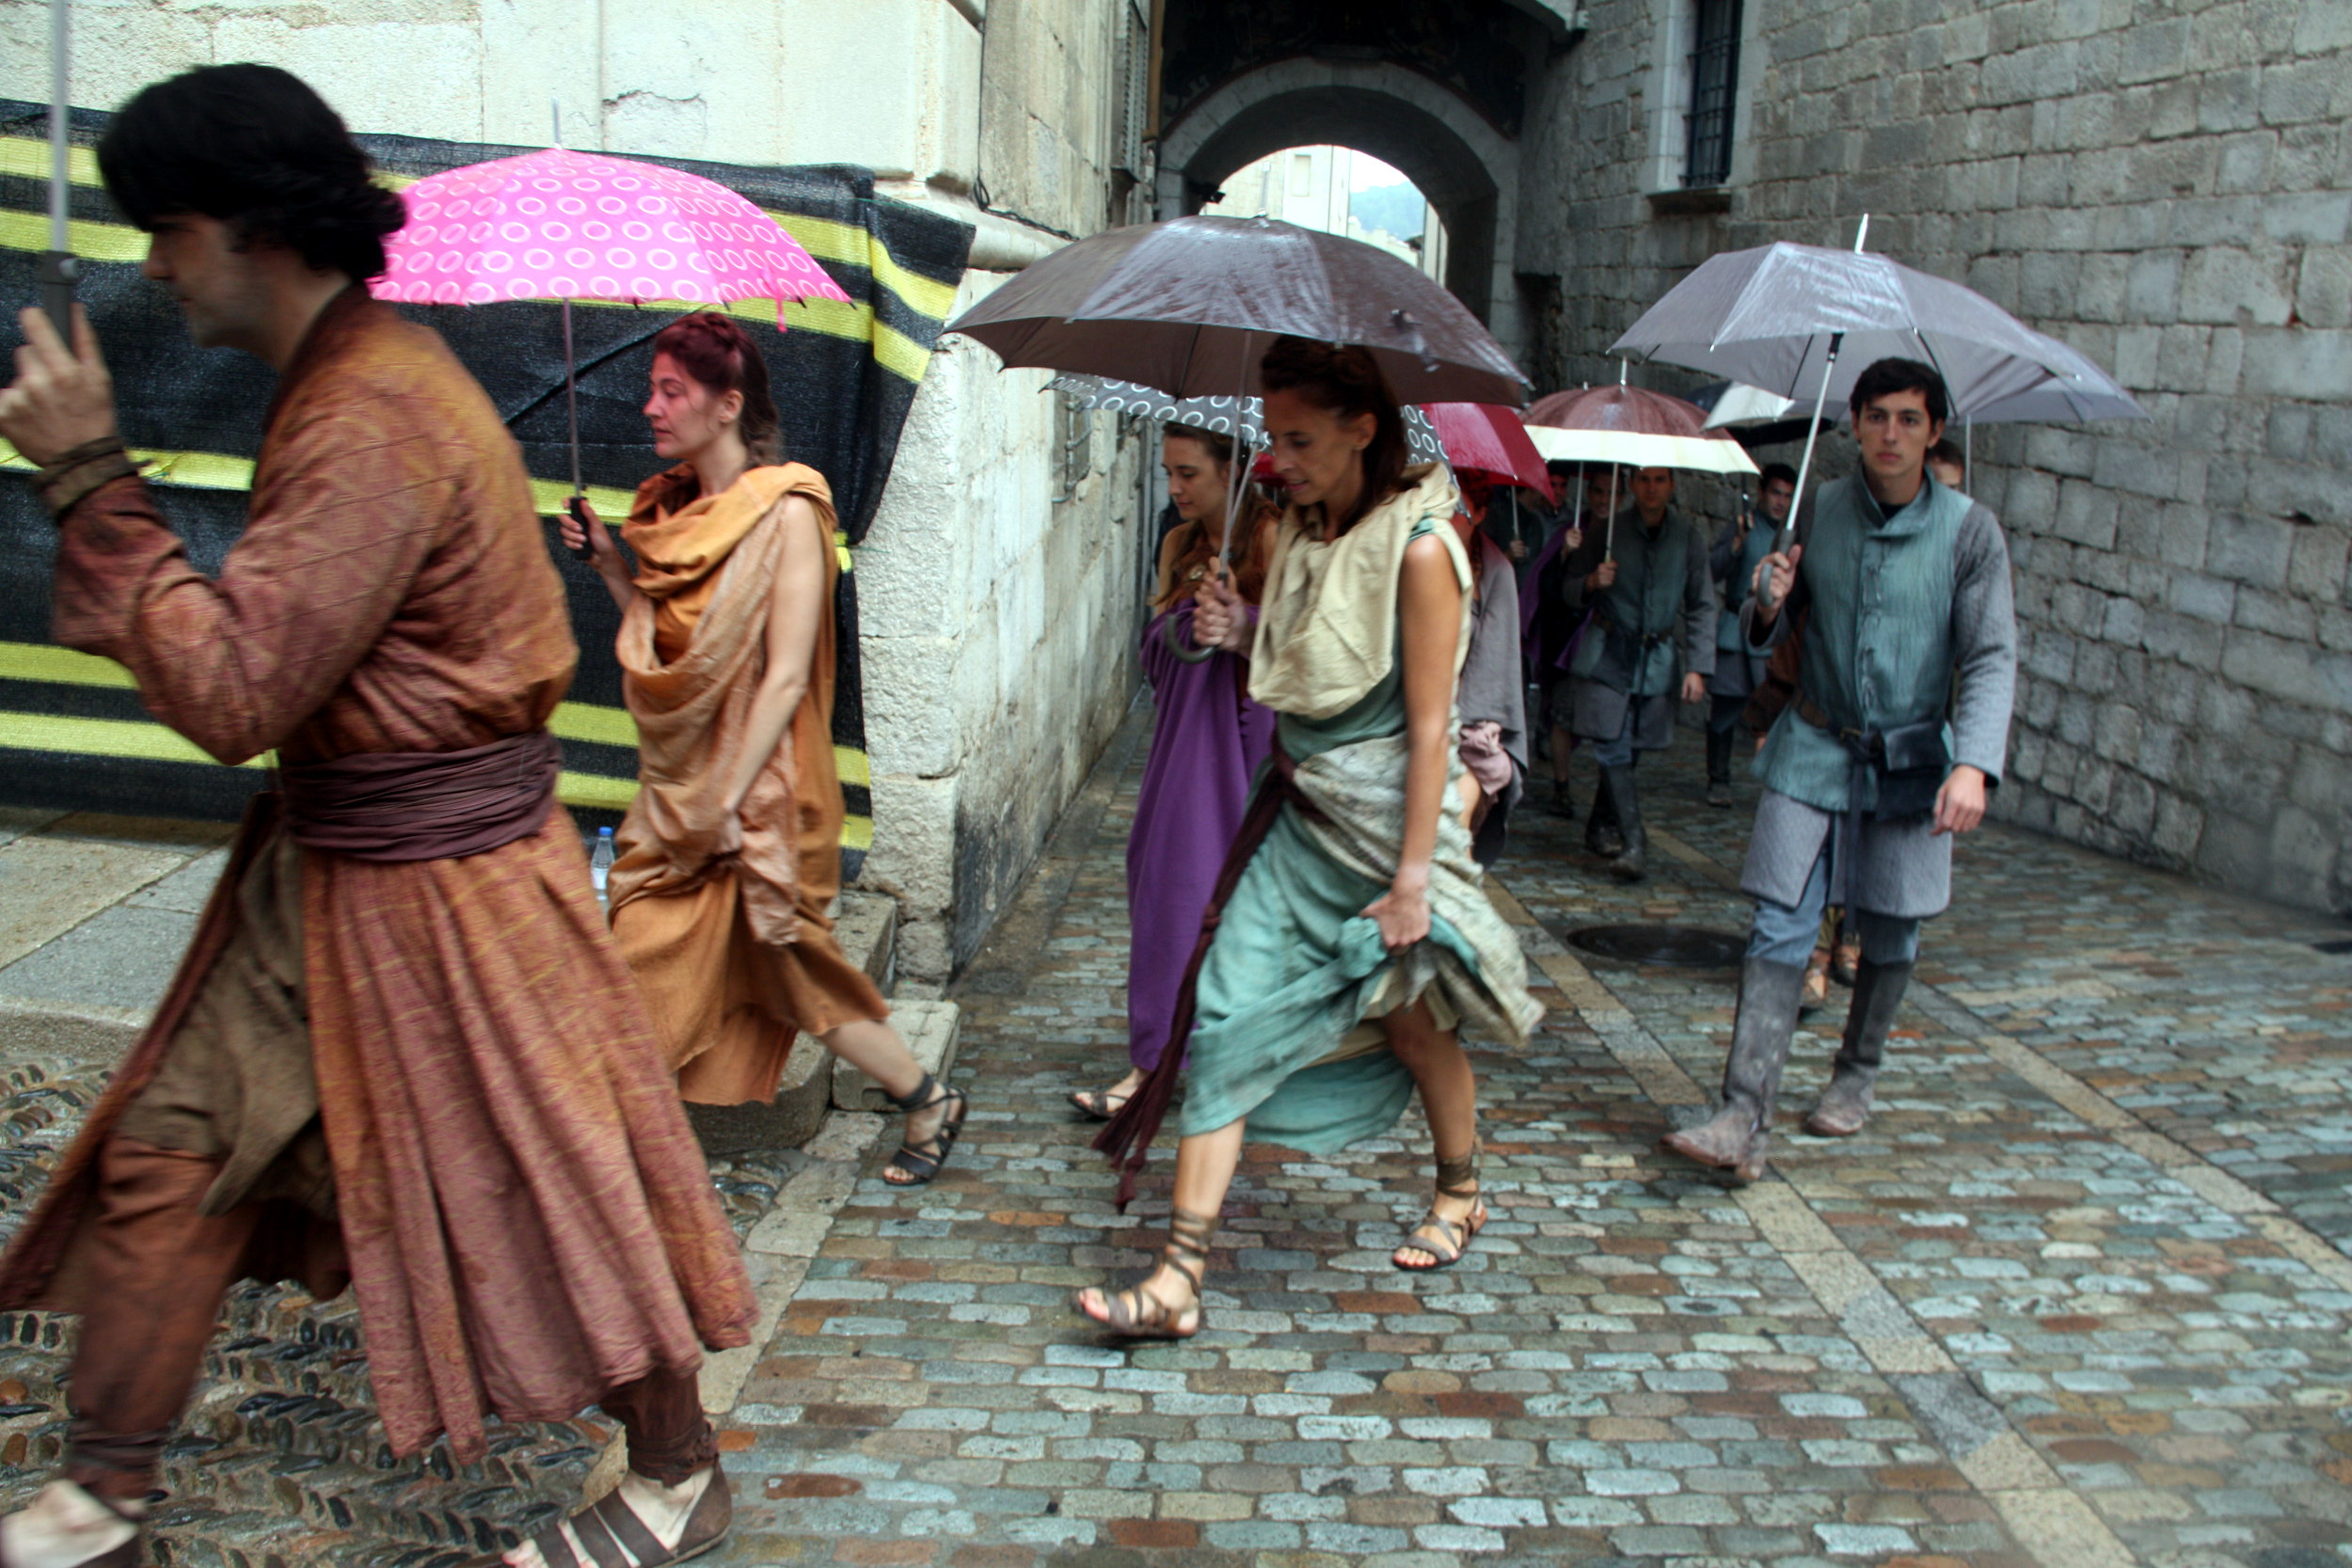 Actors from 'Game of Thrones' ready for the shooting in Girona (by ACN)